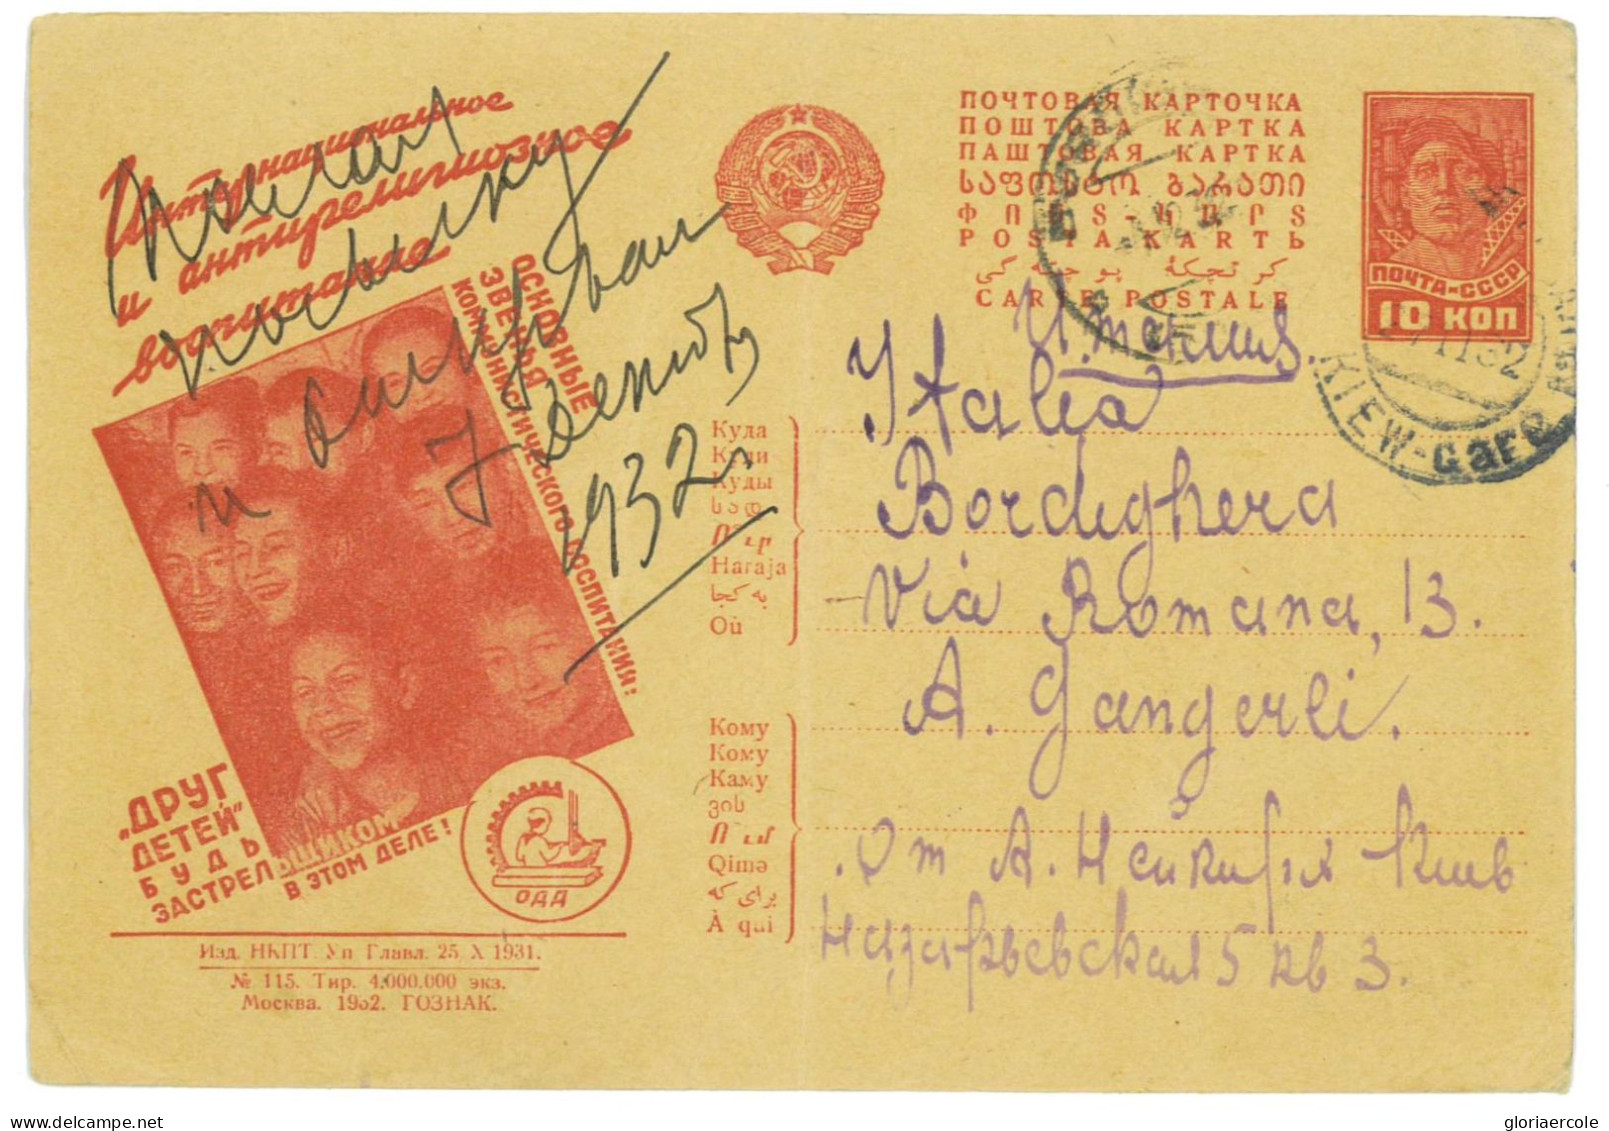 P2920 - RUSSIA , STATIONERY POST CARD MICHEL P127 /115 USED TO ITALY, 1932 - Brieven En Documenten